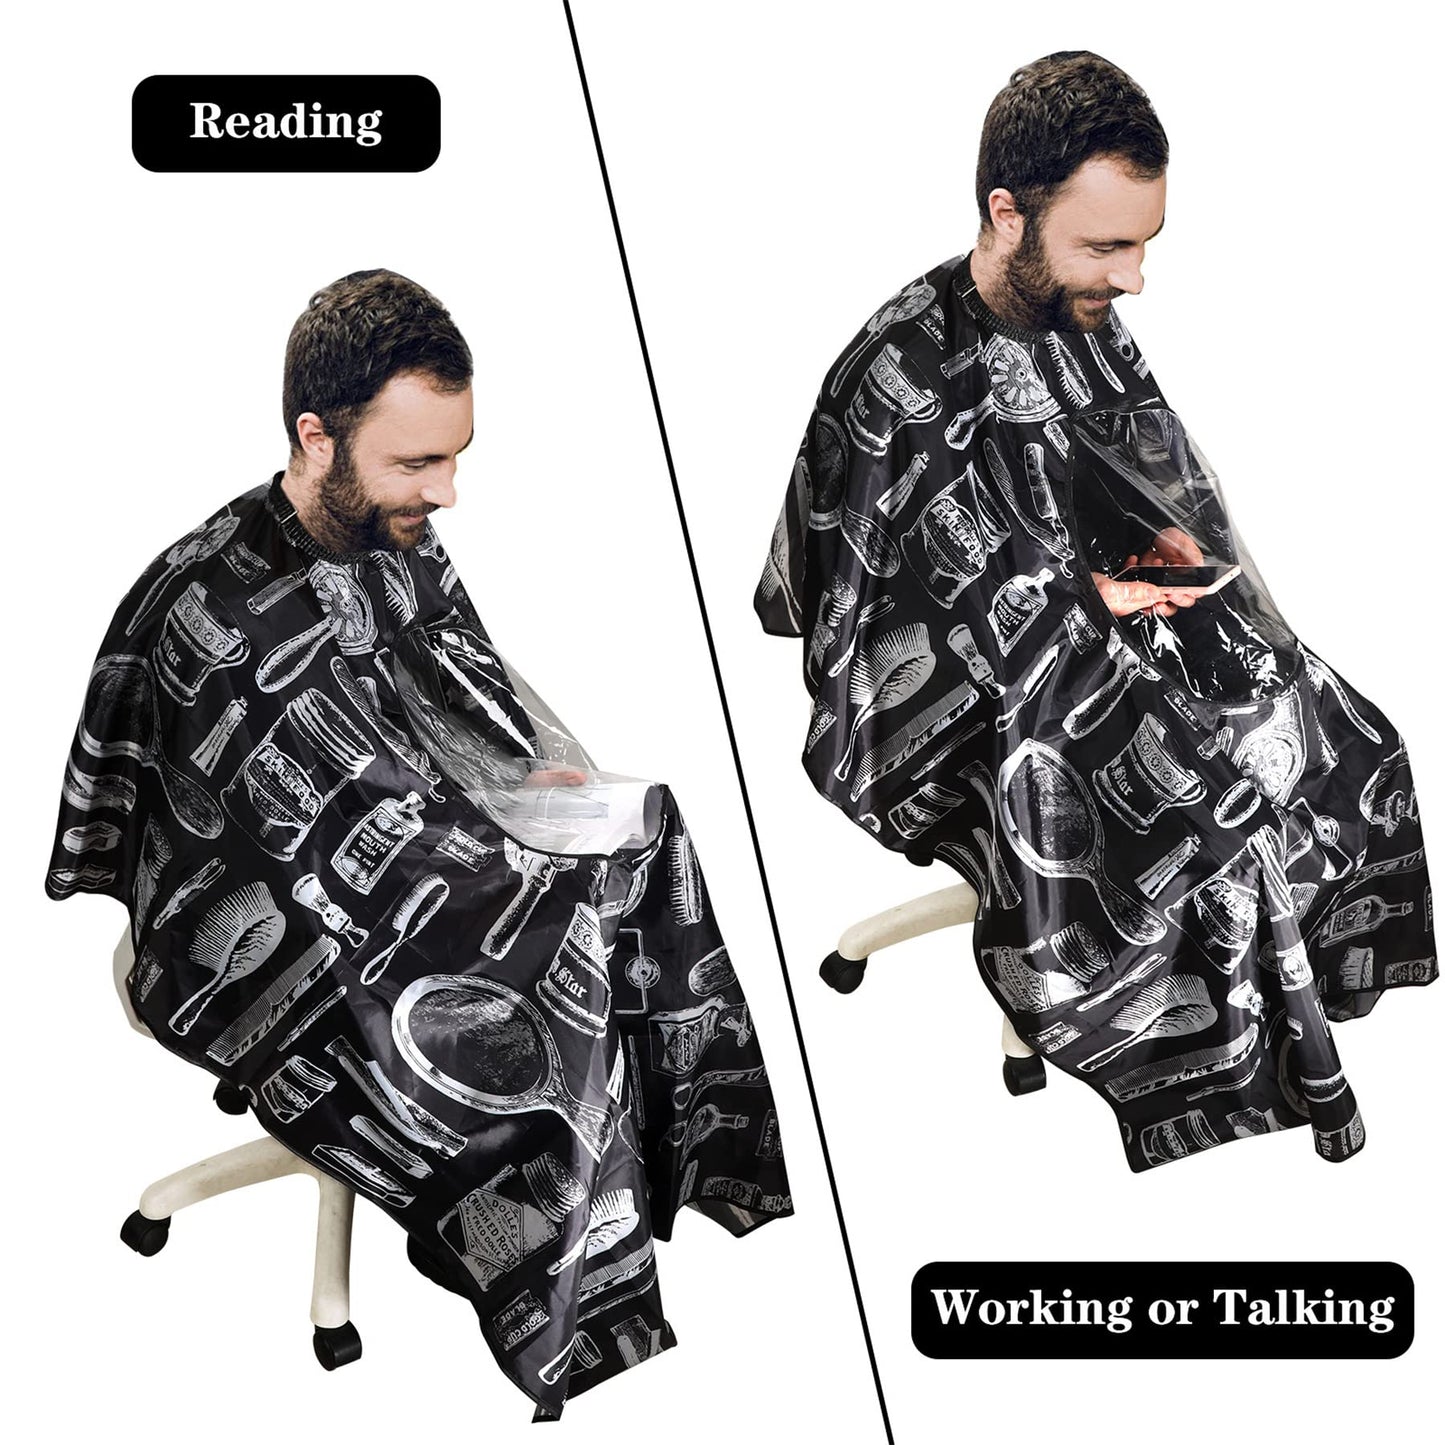 FEBSNOW Professional Barber Cape with Neck Duster Brush Large Hair Cutting Cape with See-Through Window Waterproof Salon Cape